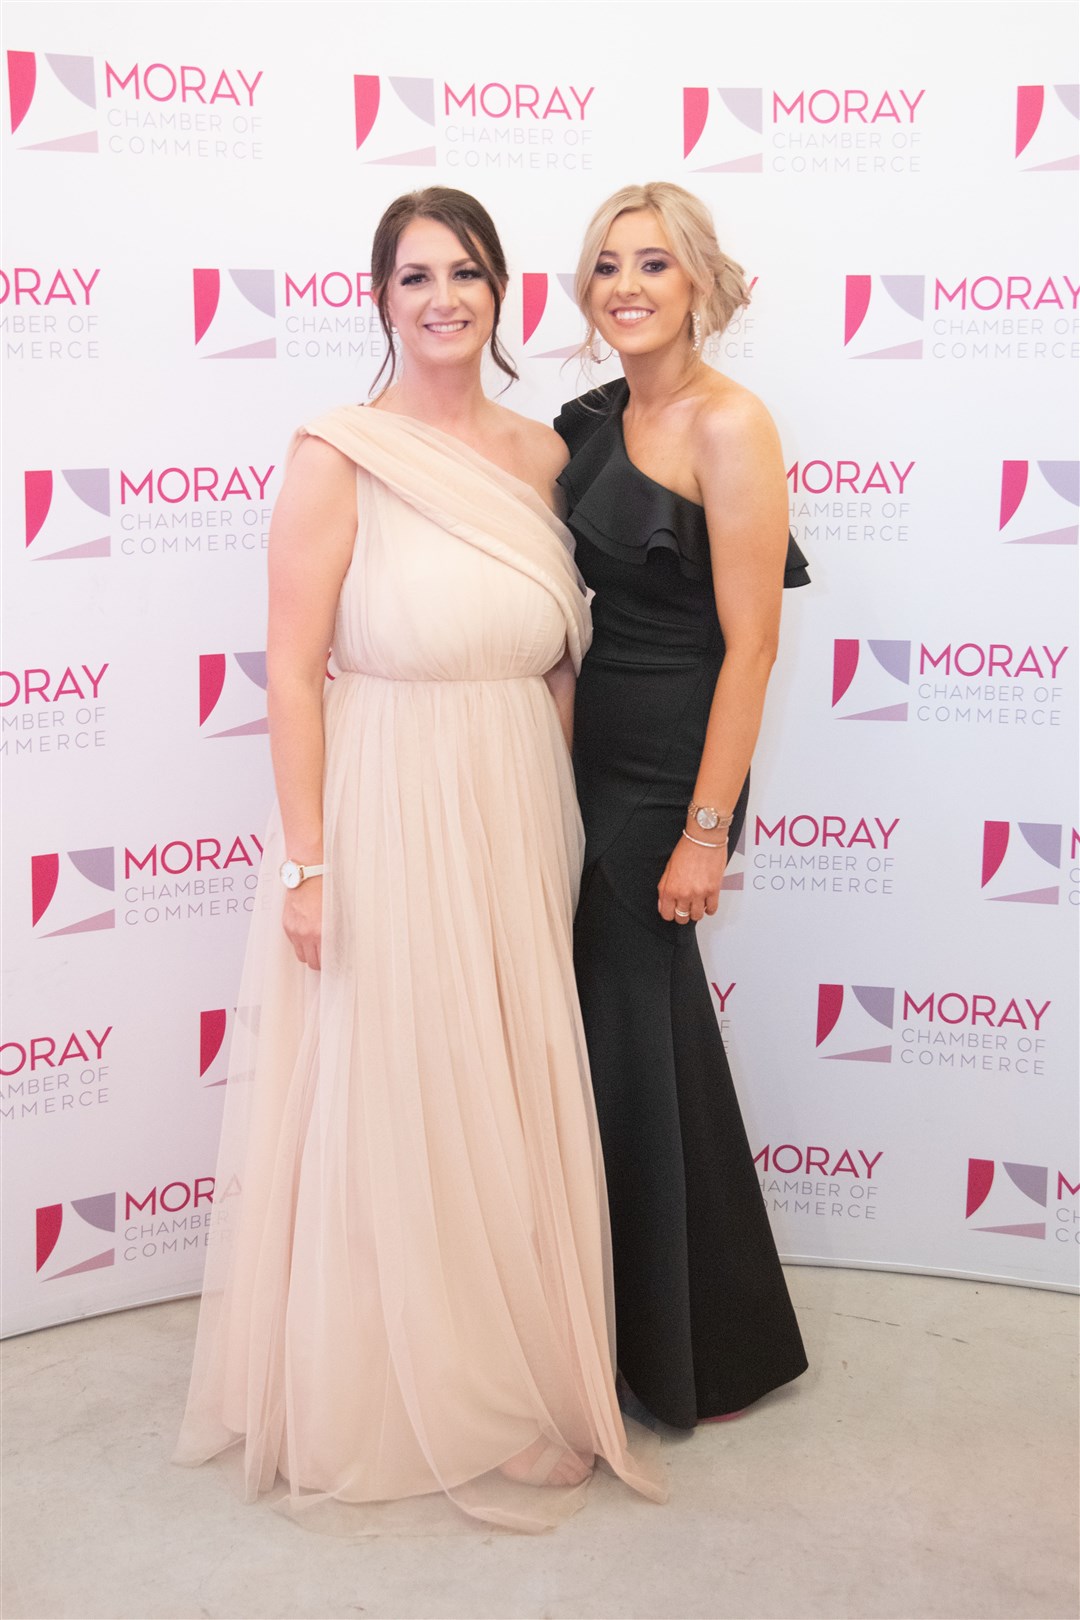 Moray Chamber of Commerce's Sarah Medcraf and Aimee Walker...17th Annual Moray Chamber of Commerce Awards Dinner, held at Gordon Castle on Friday 30th September 2022...Picture: Daniel Forsyth..